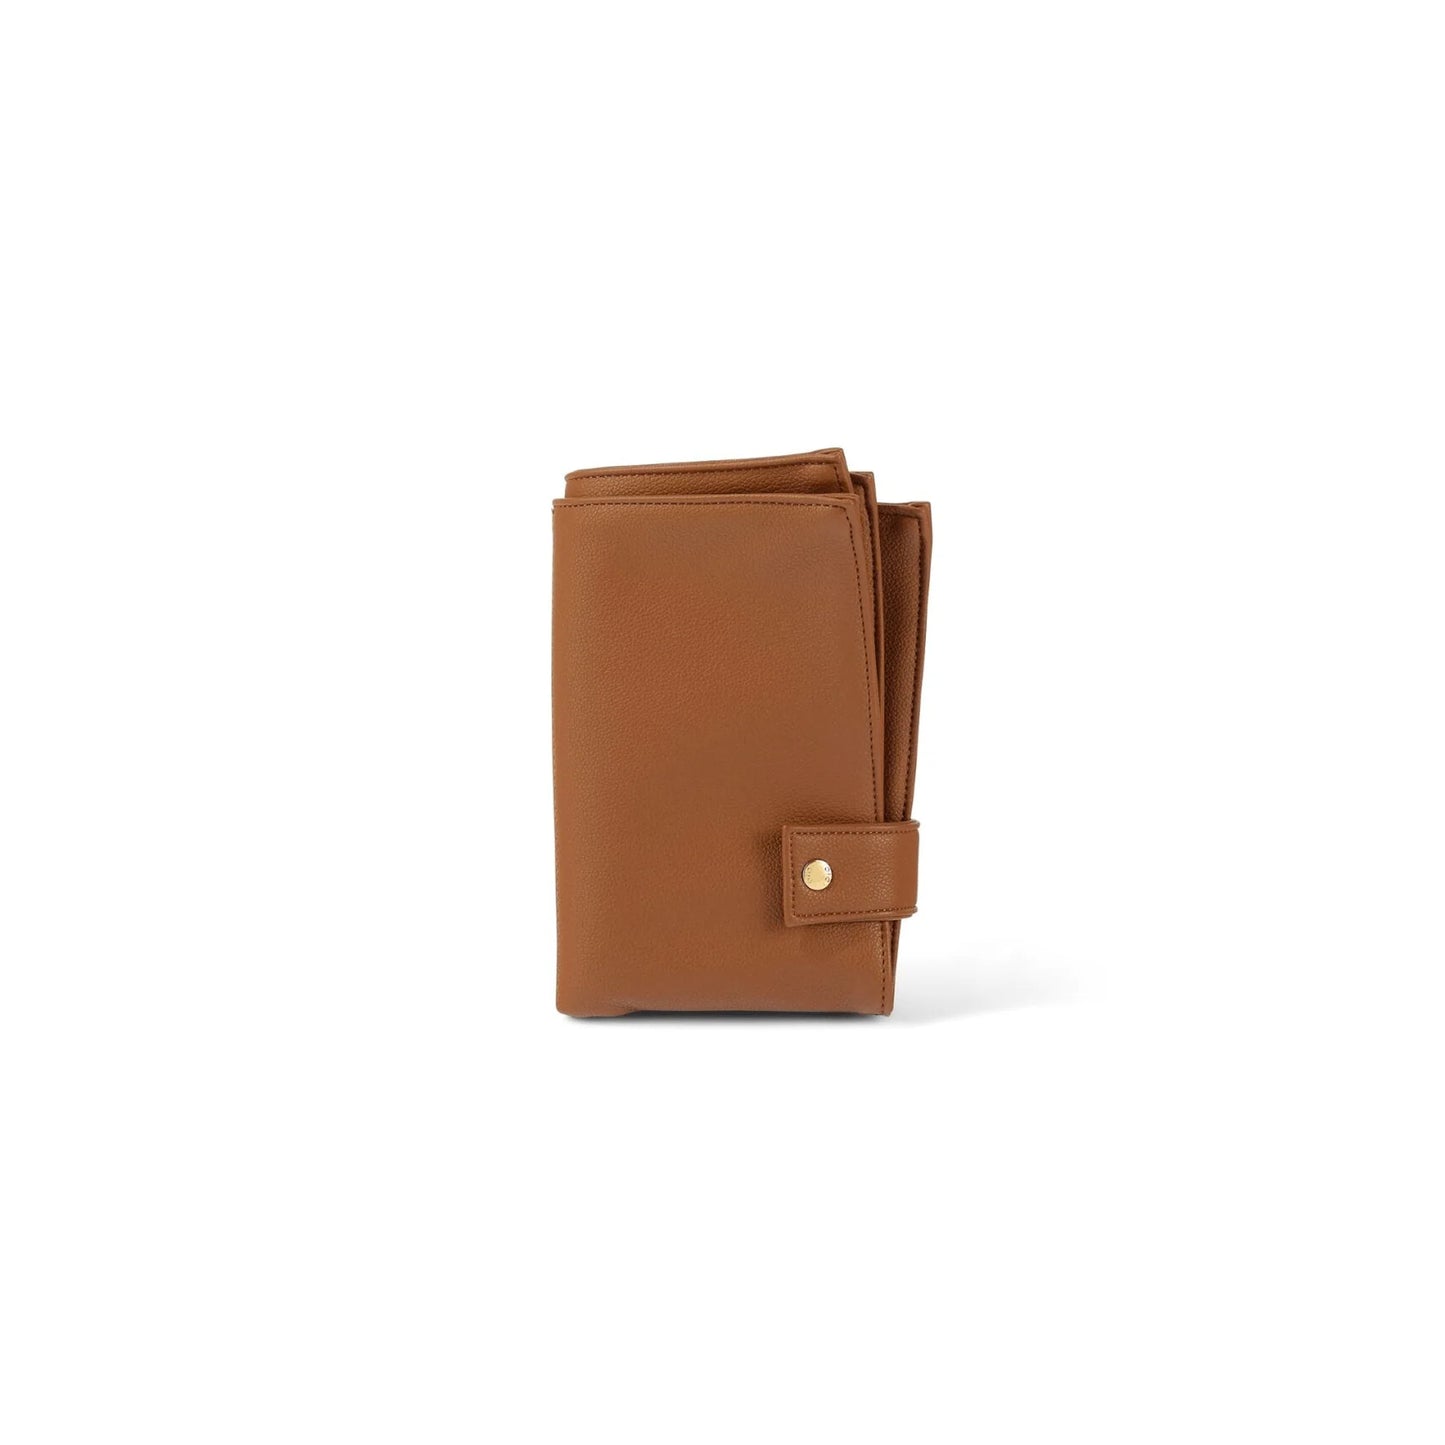 Nappy Changing Pouch- Chestnut Brown Faux Leather